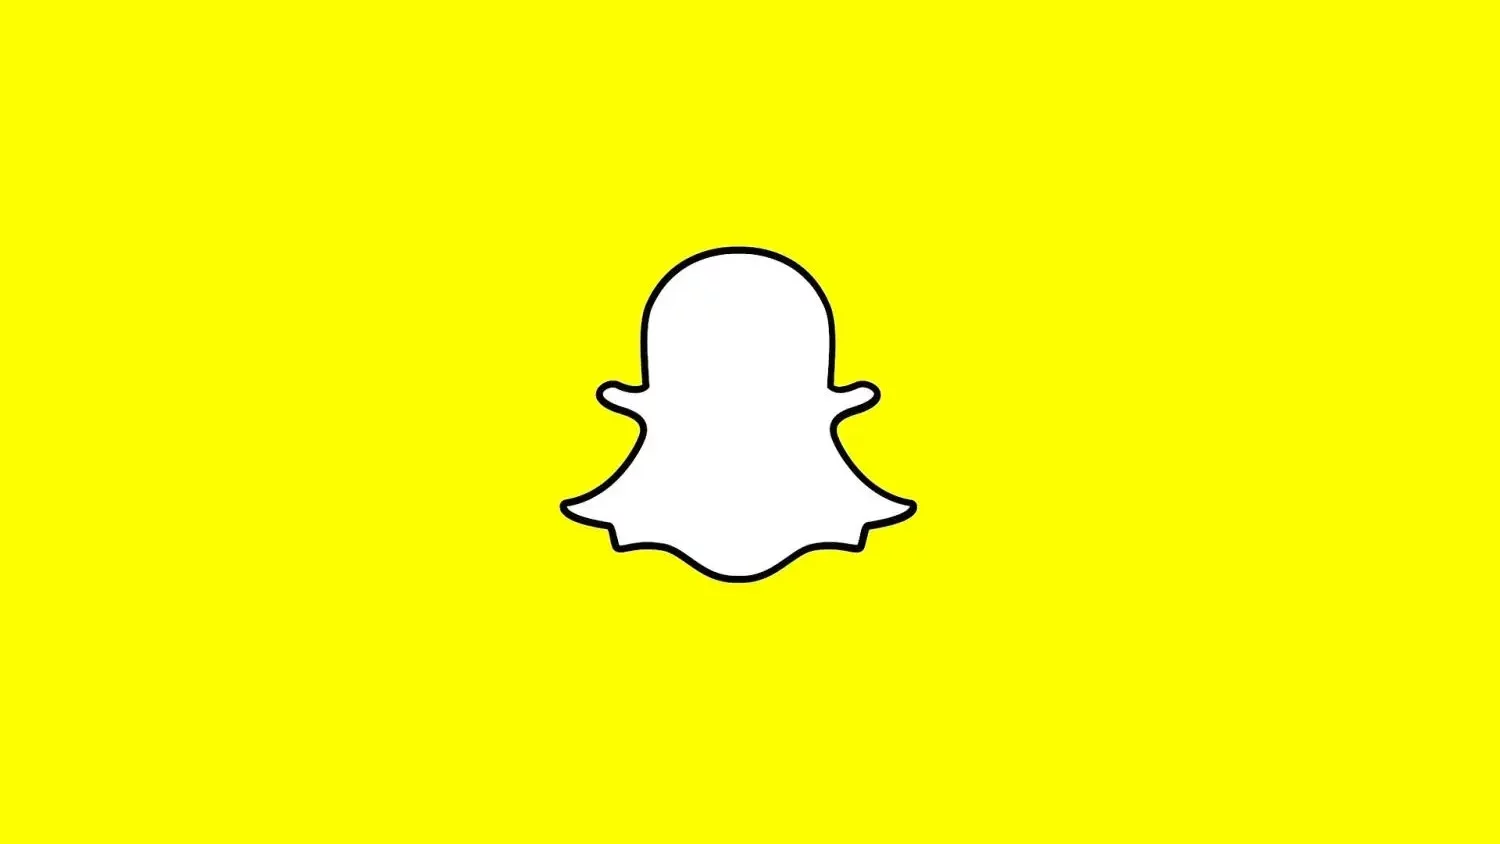 Why Your Snapchat Subscriptions Disappeared Possible? Let’s Find Out Here!